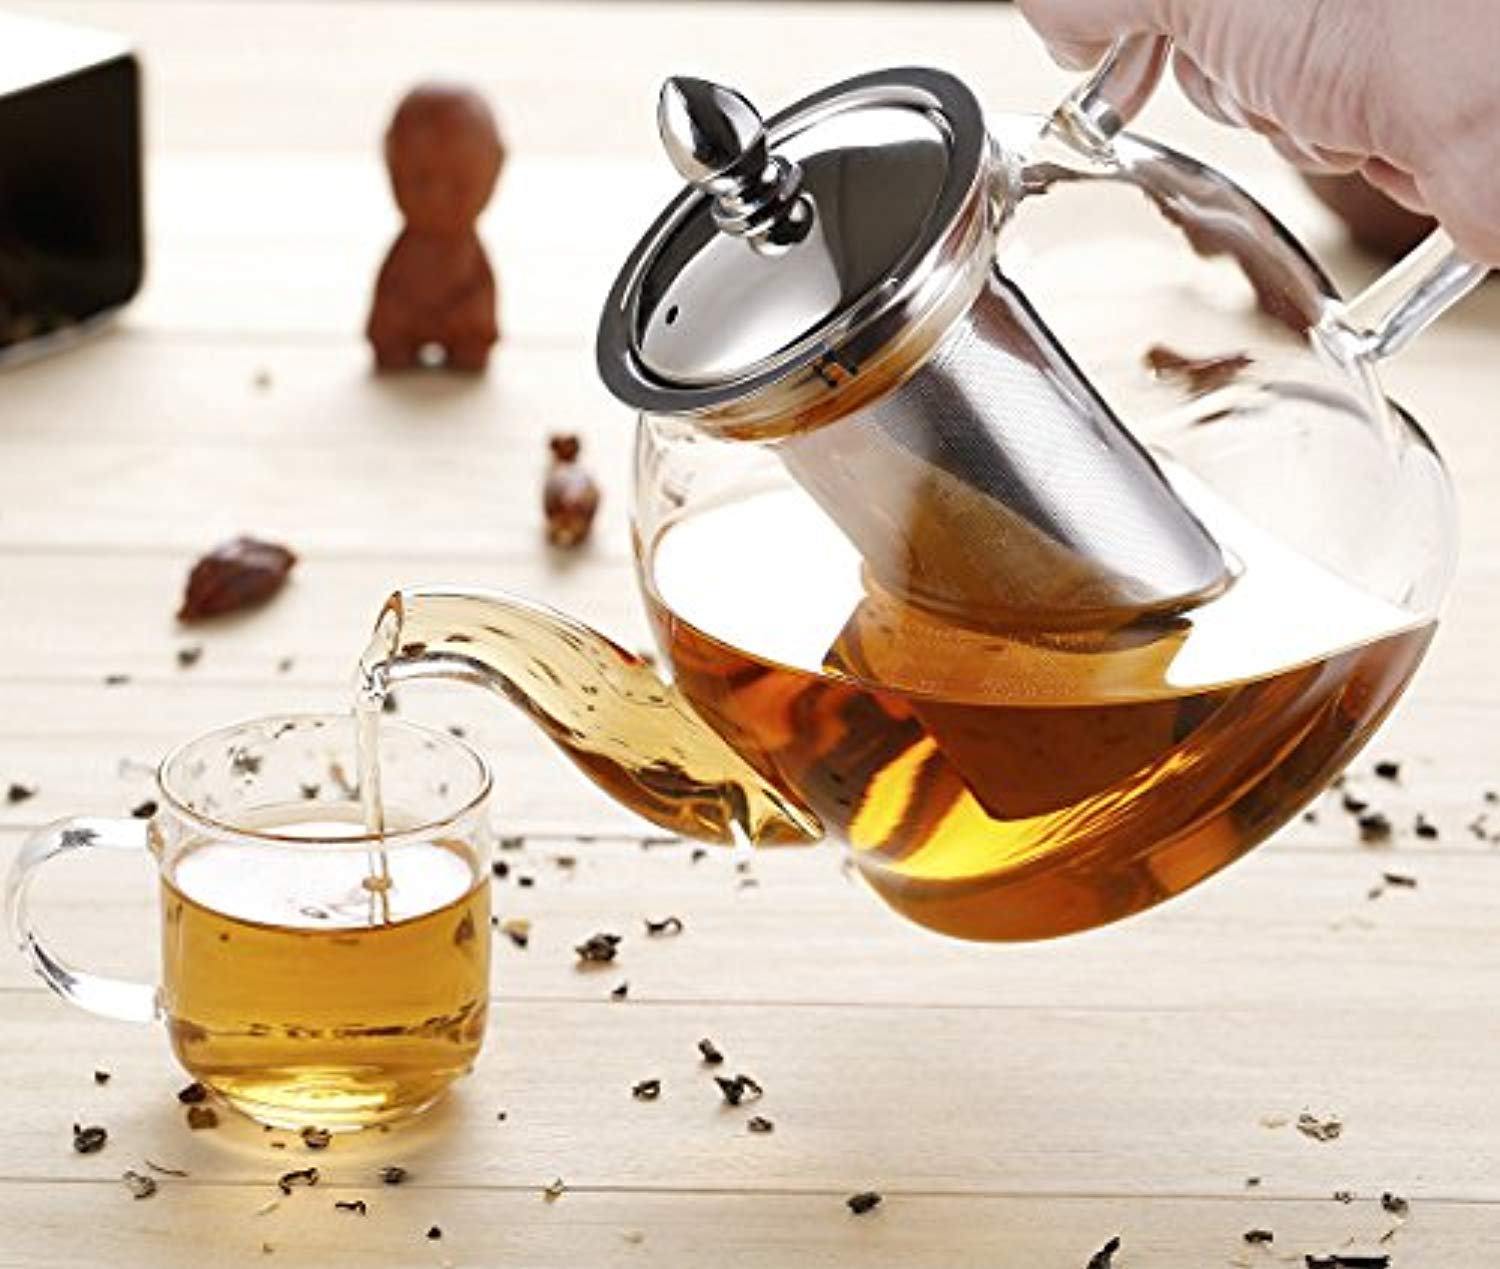 800ml Glass Teapot with Removable Infuser, Stovetop Safe Tea Kettle - China  Kitchen Products and Kitchen Tool price